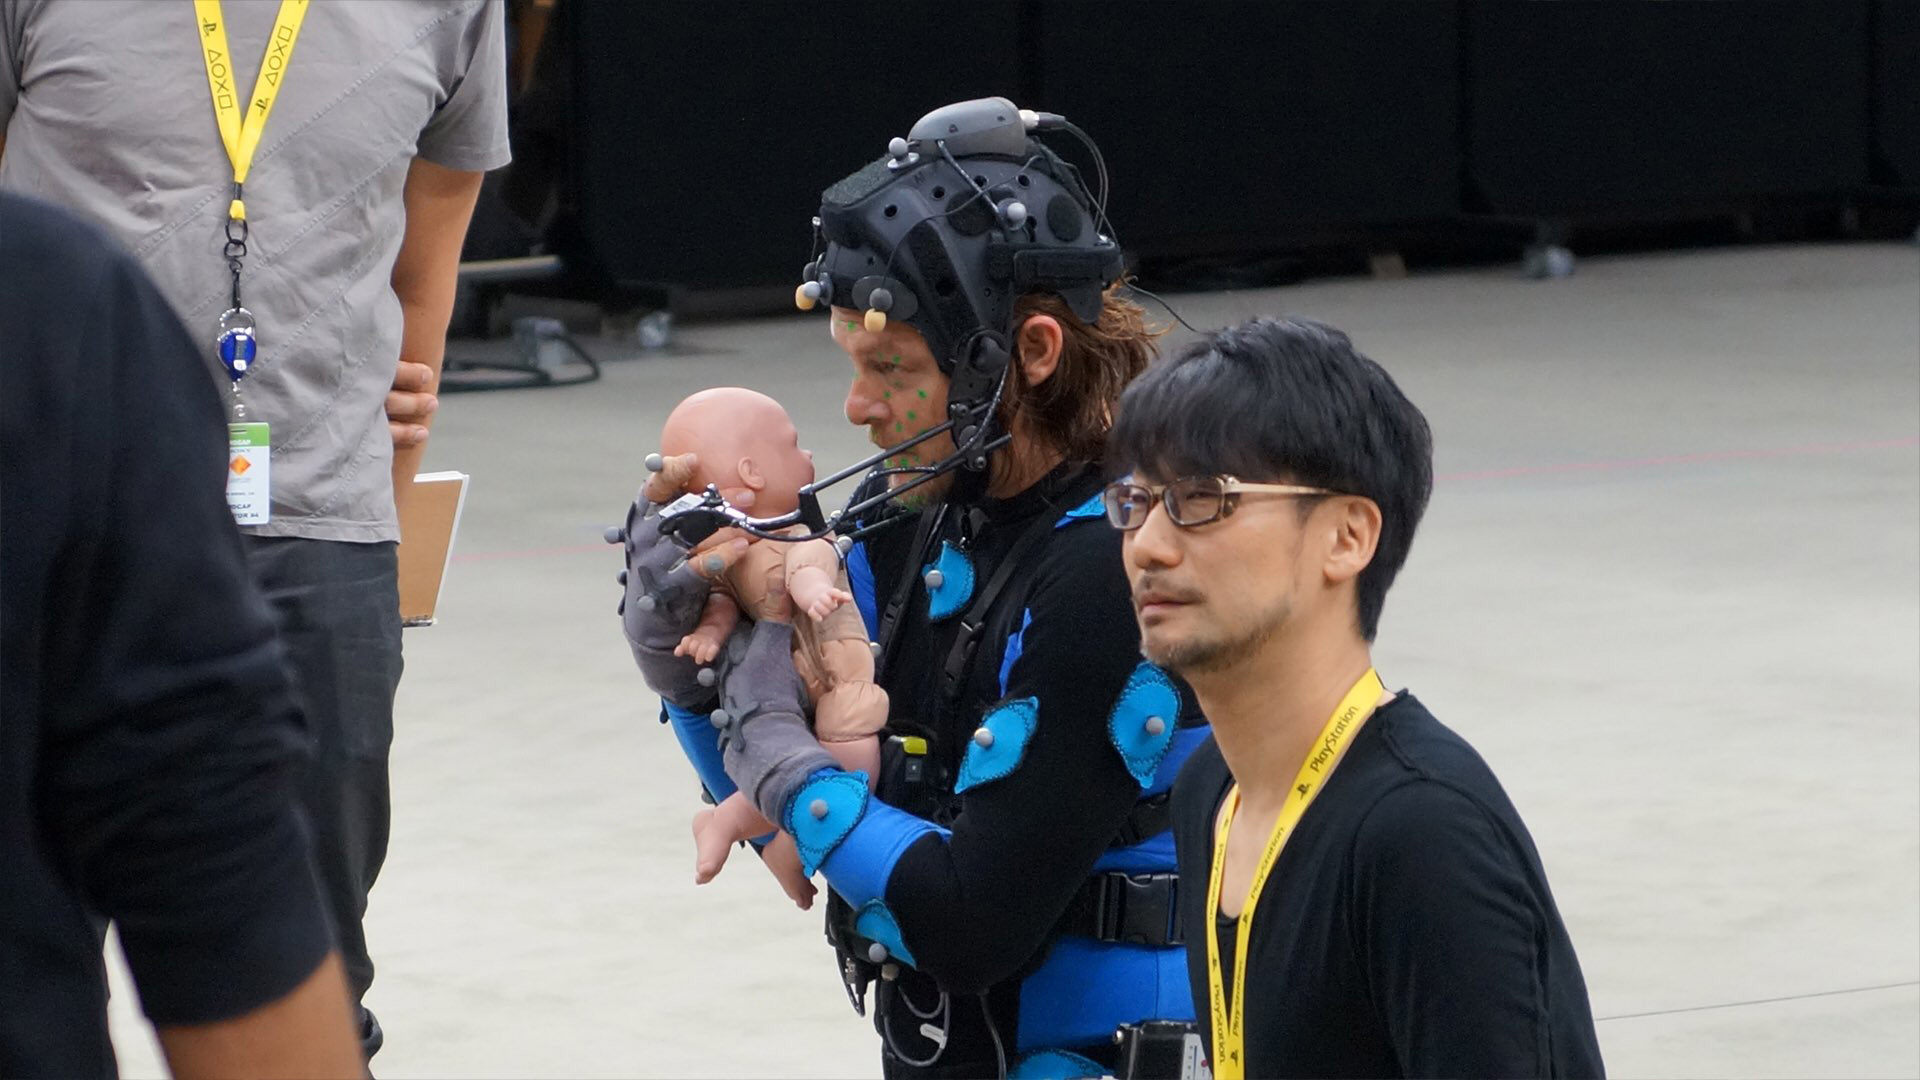 The-Making-of-Death-Stranding-HQ-8